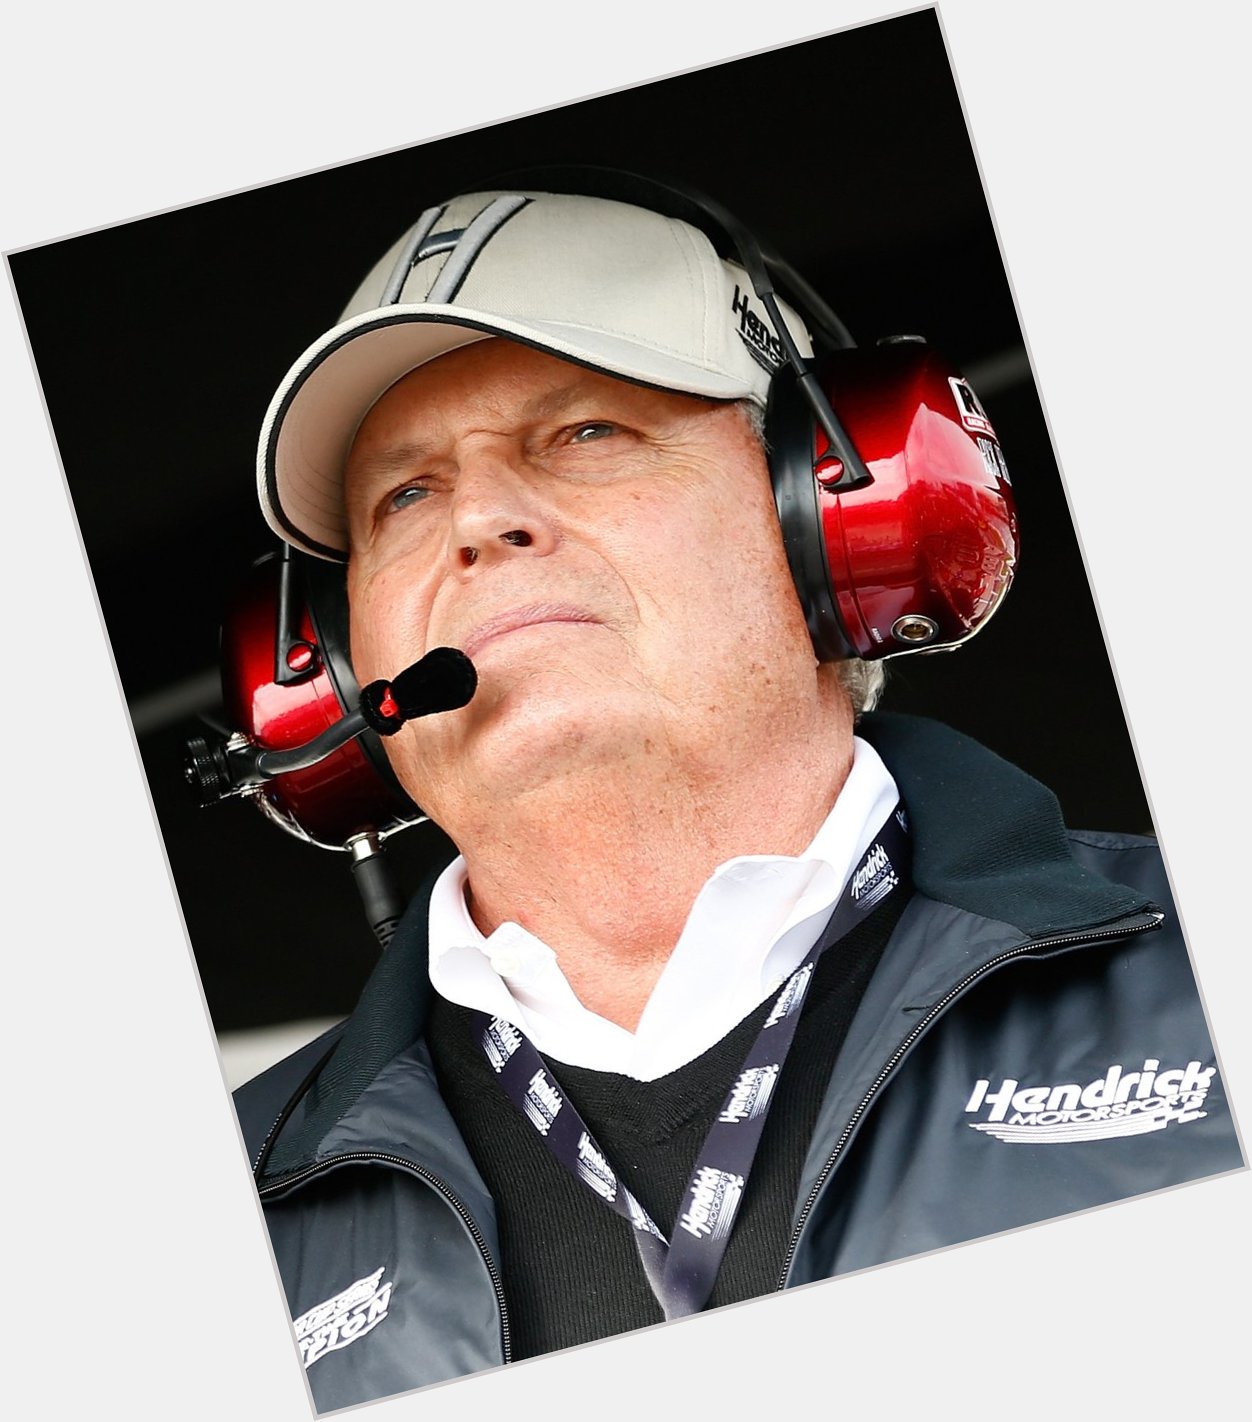  To Mr. H! Remessage to wish inductee Rick Hendrick a very happy birthday! 